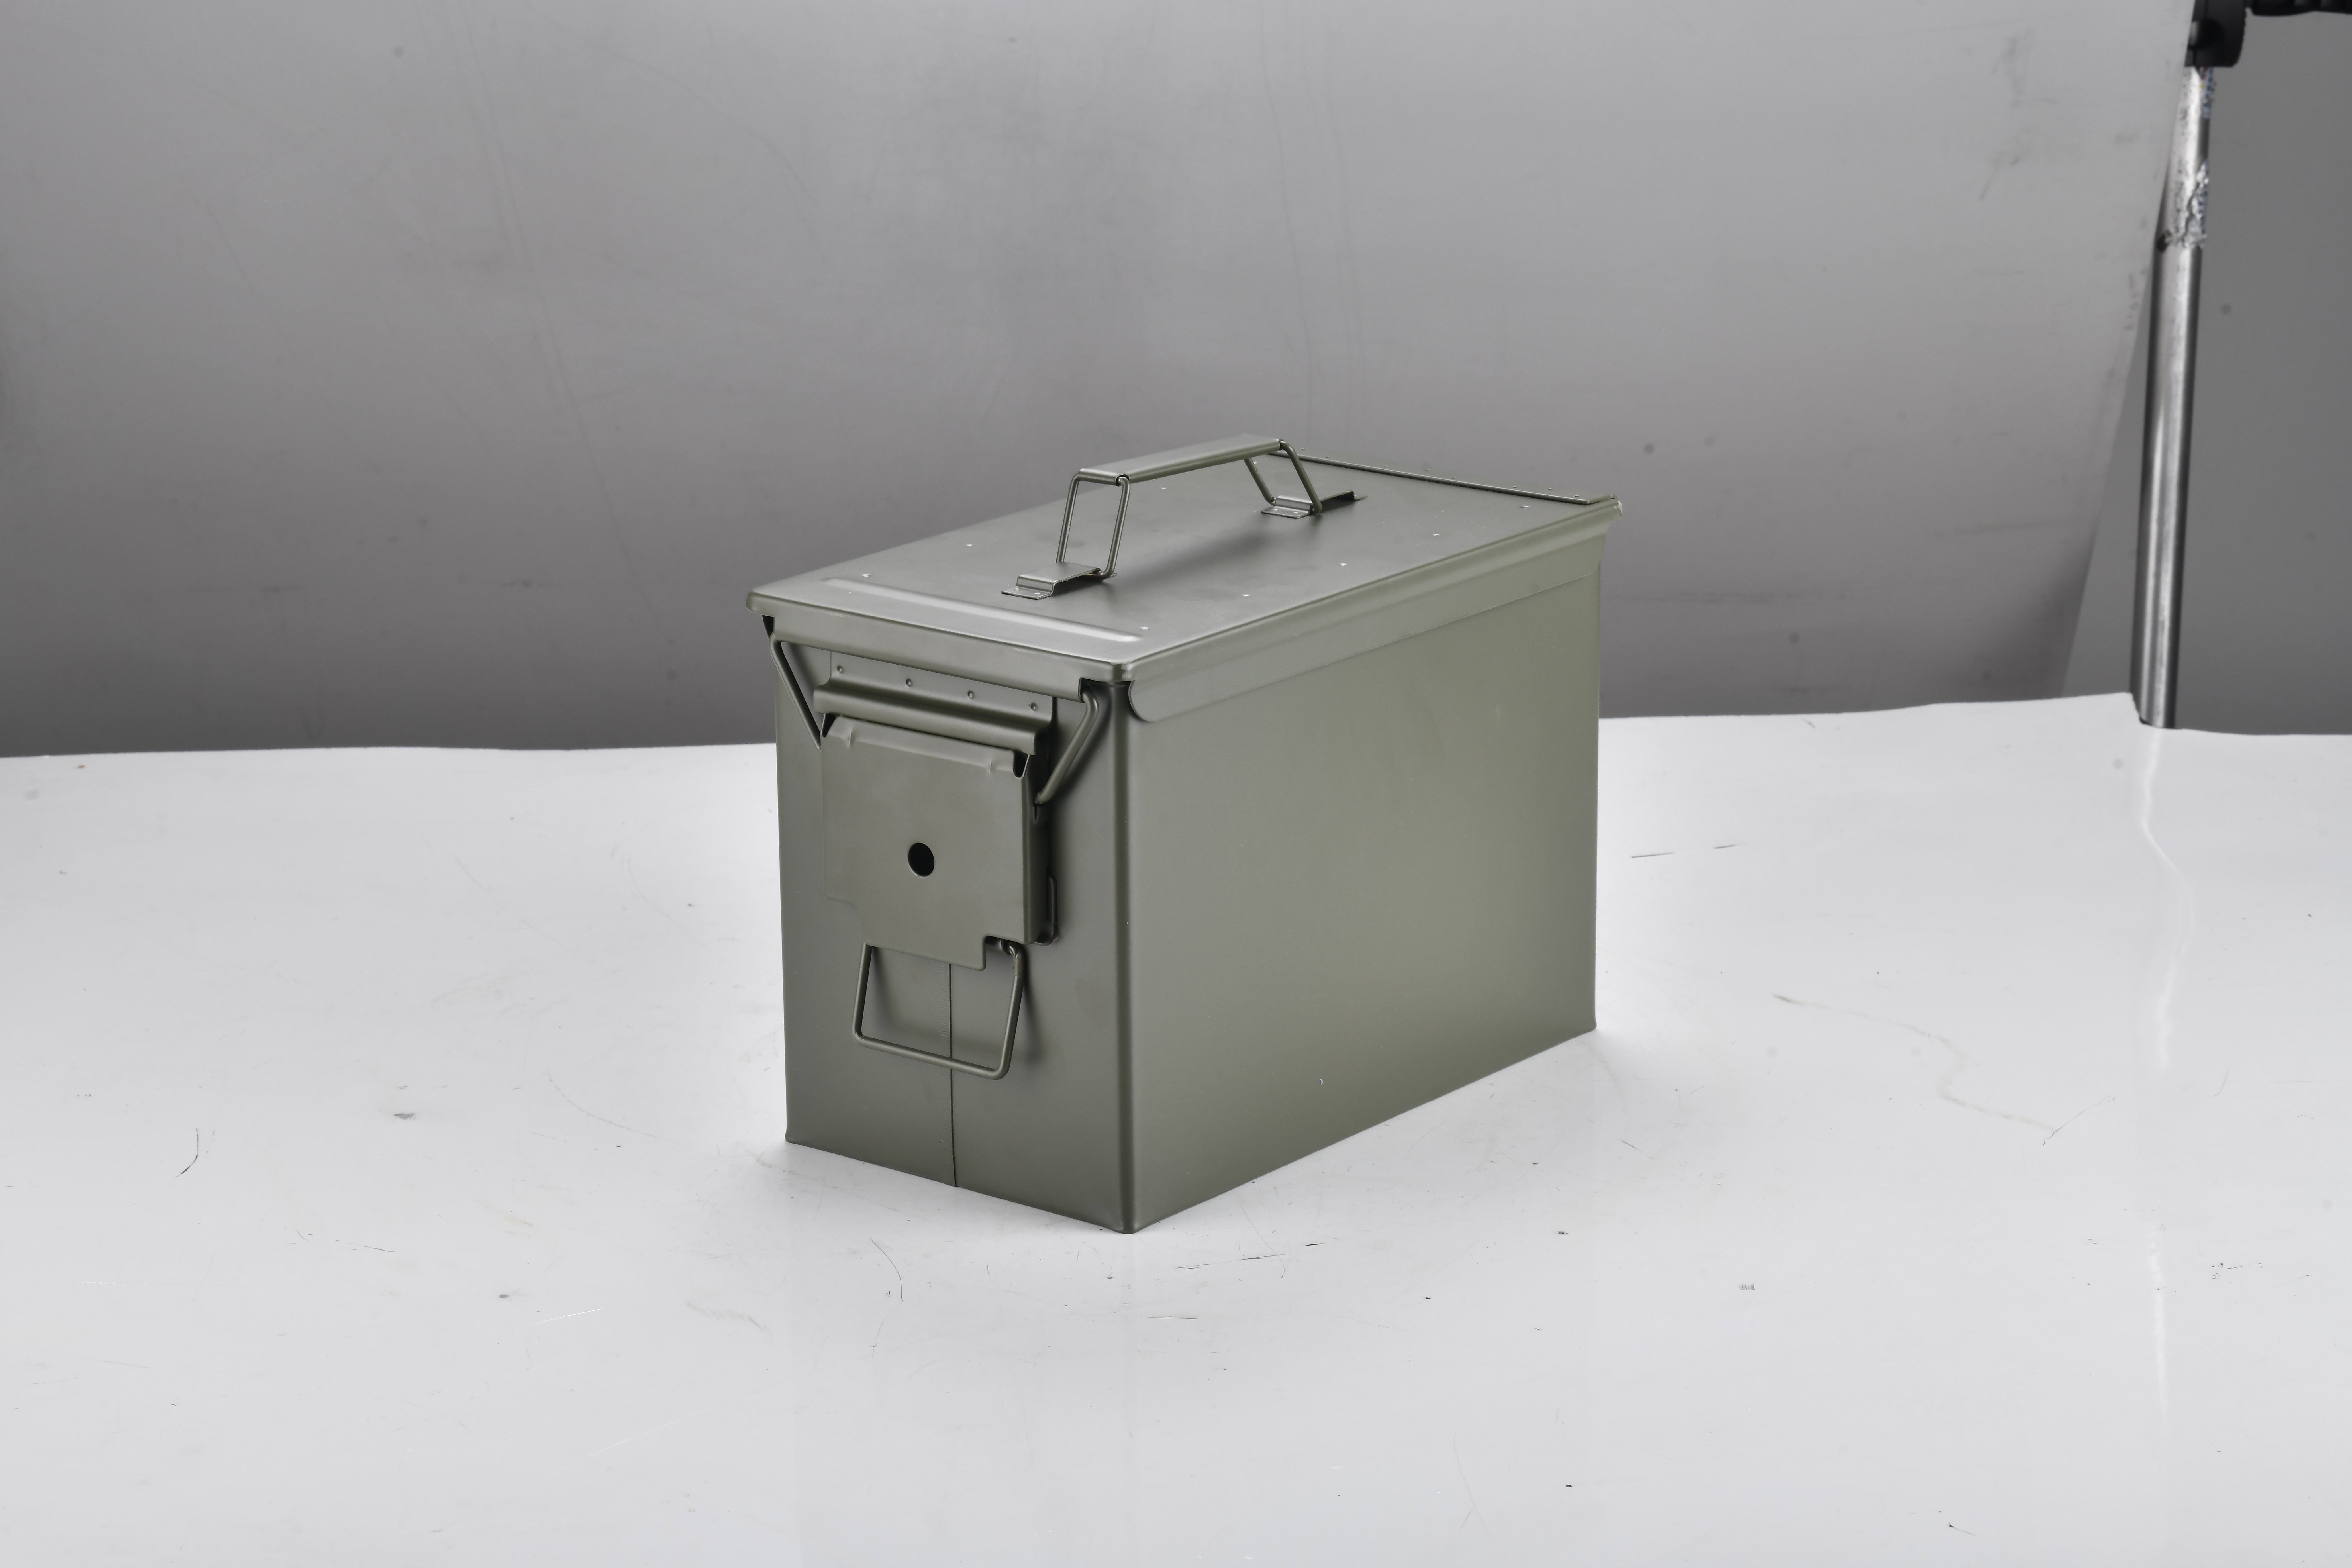 New Military & Army Ammo Storage Container - M2A1 & M19A1 Ammunition Boxes Tactical Metal Ammo Can